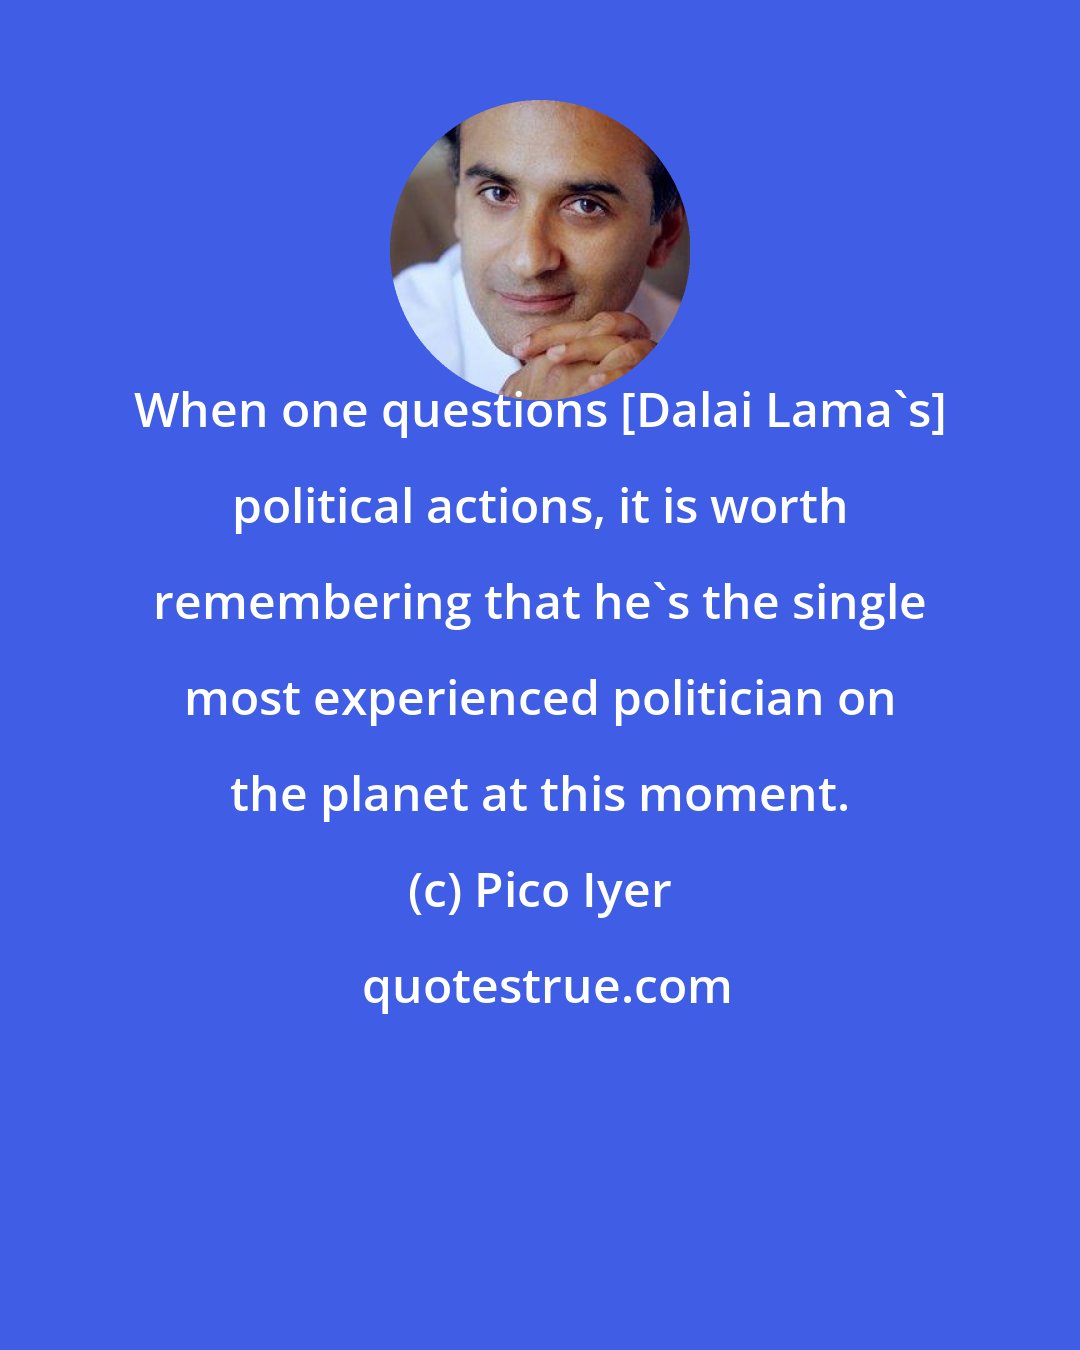 Pico Iyer: When one questions [Dalai Lama's] political actions, it is worth remembering that he's the single most experienced politician on the planet at this moment.